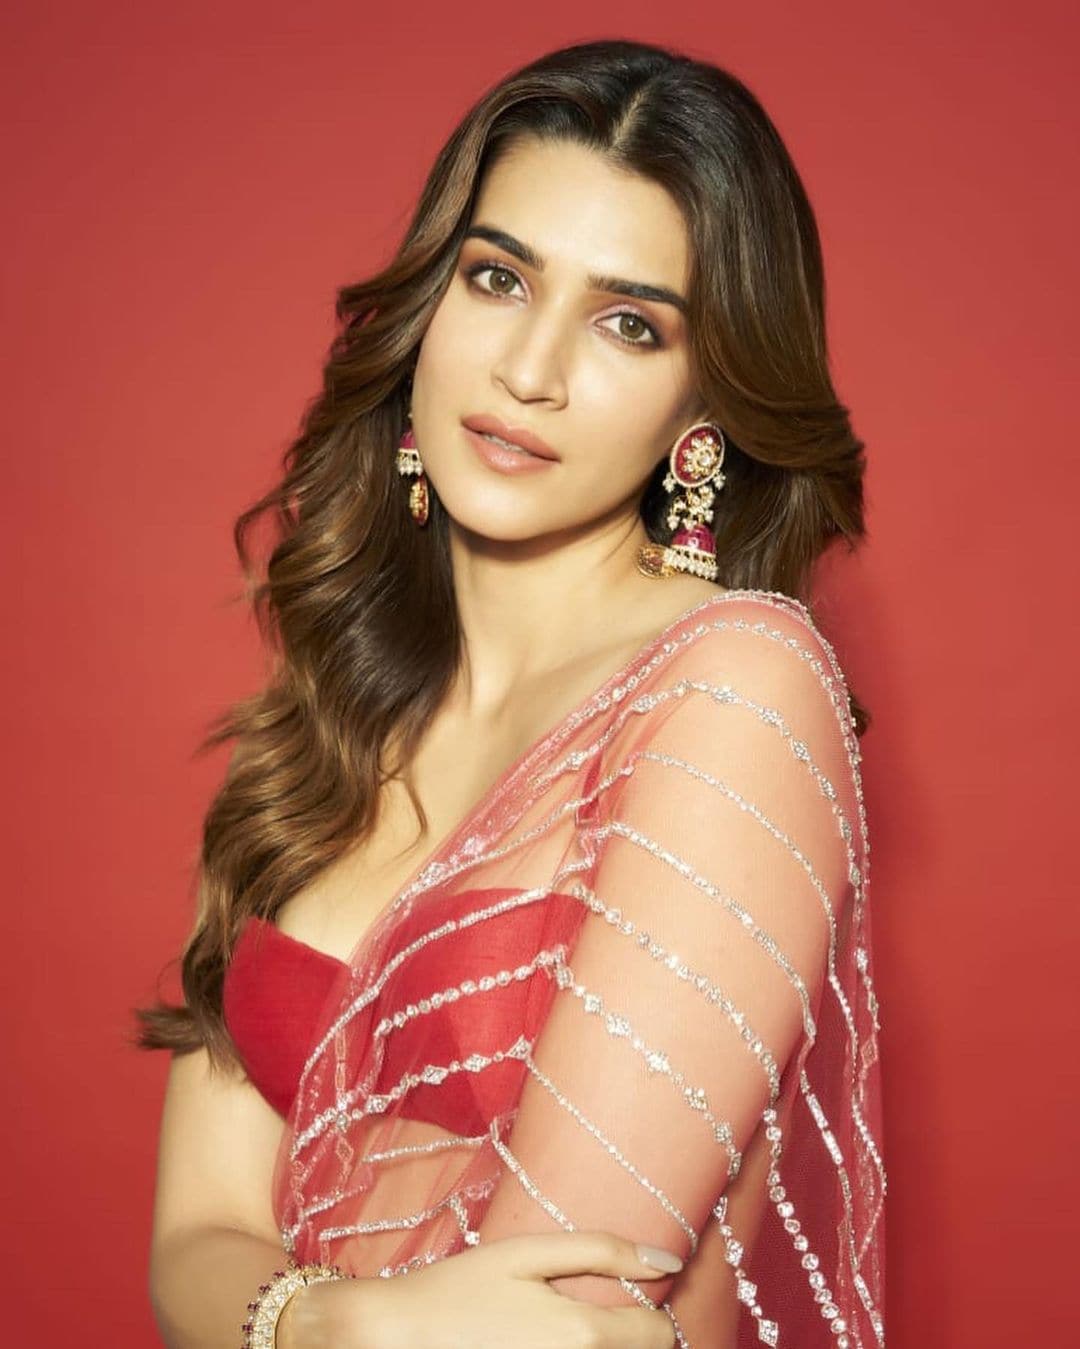 Kriti Sanon pairs the saree with a plain red blouse